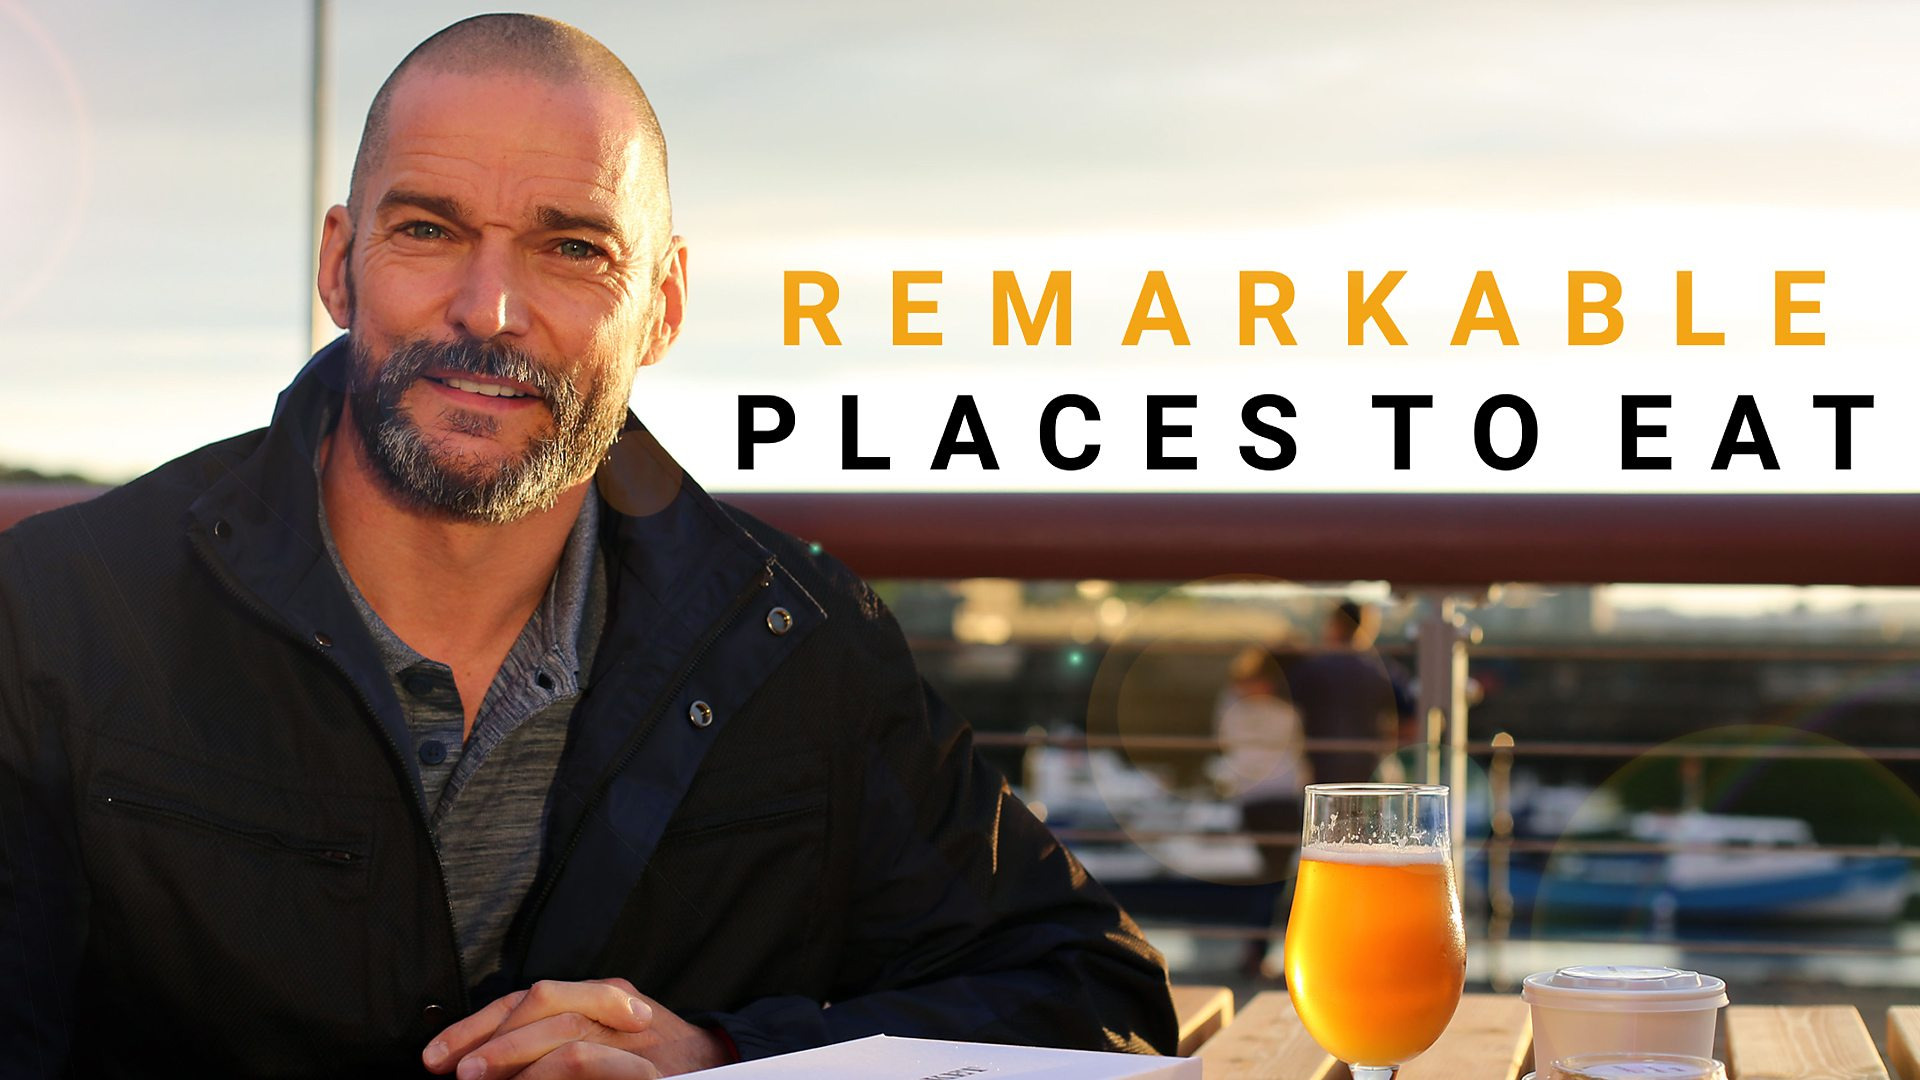 Show Remarkable Places to Eat